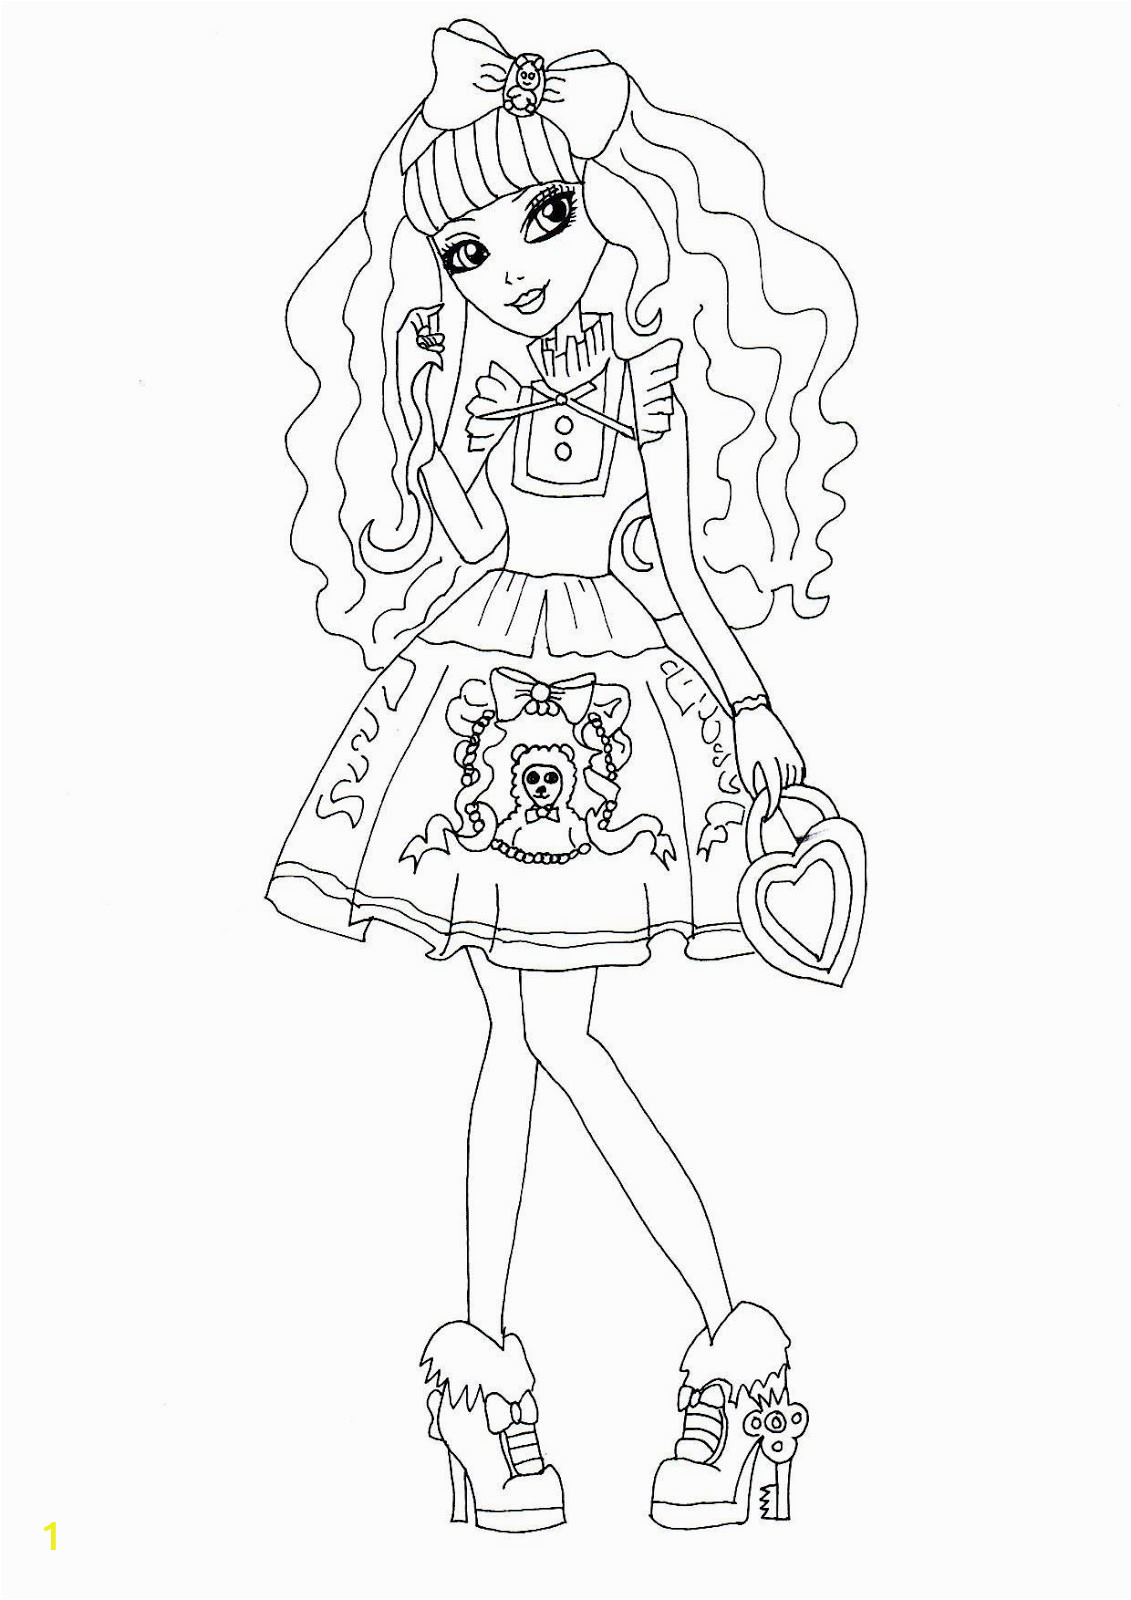 Ever after High Thronecoming Coloring Pages Froggy Goes to School Coloring Pages